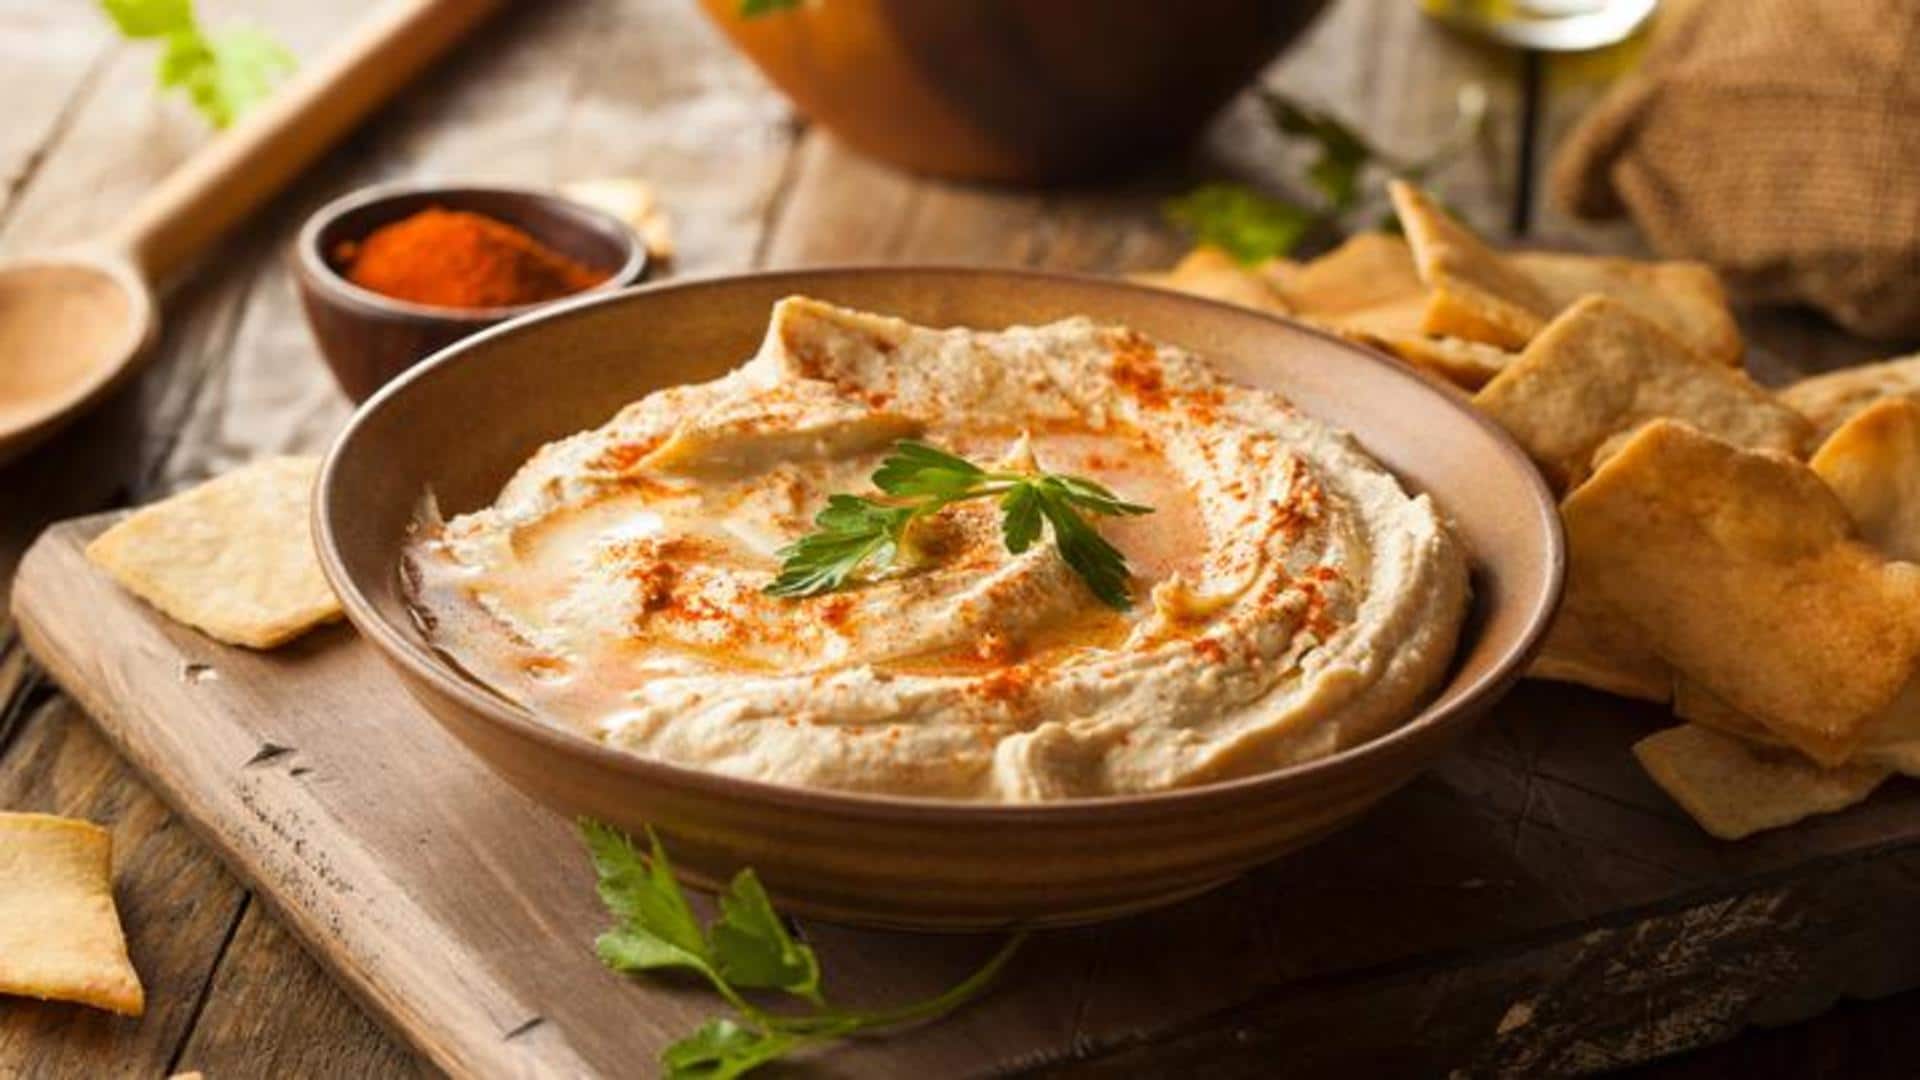 You can easily try these hummus recipes at home 